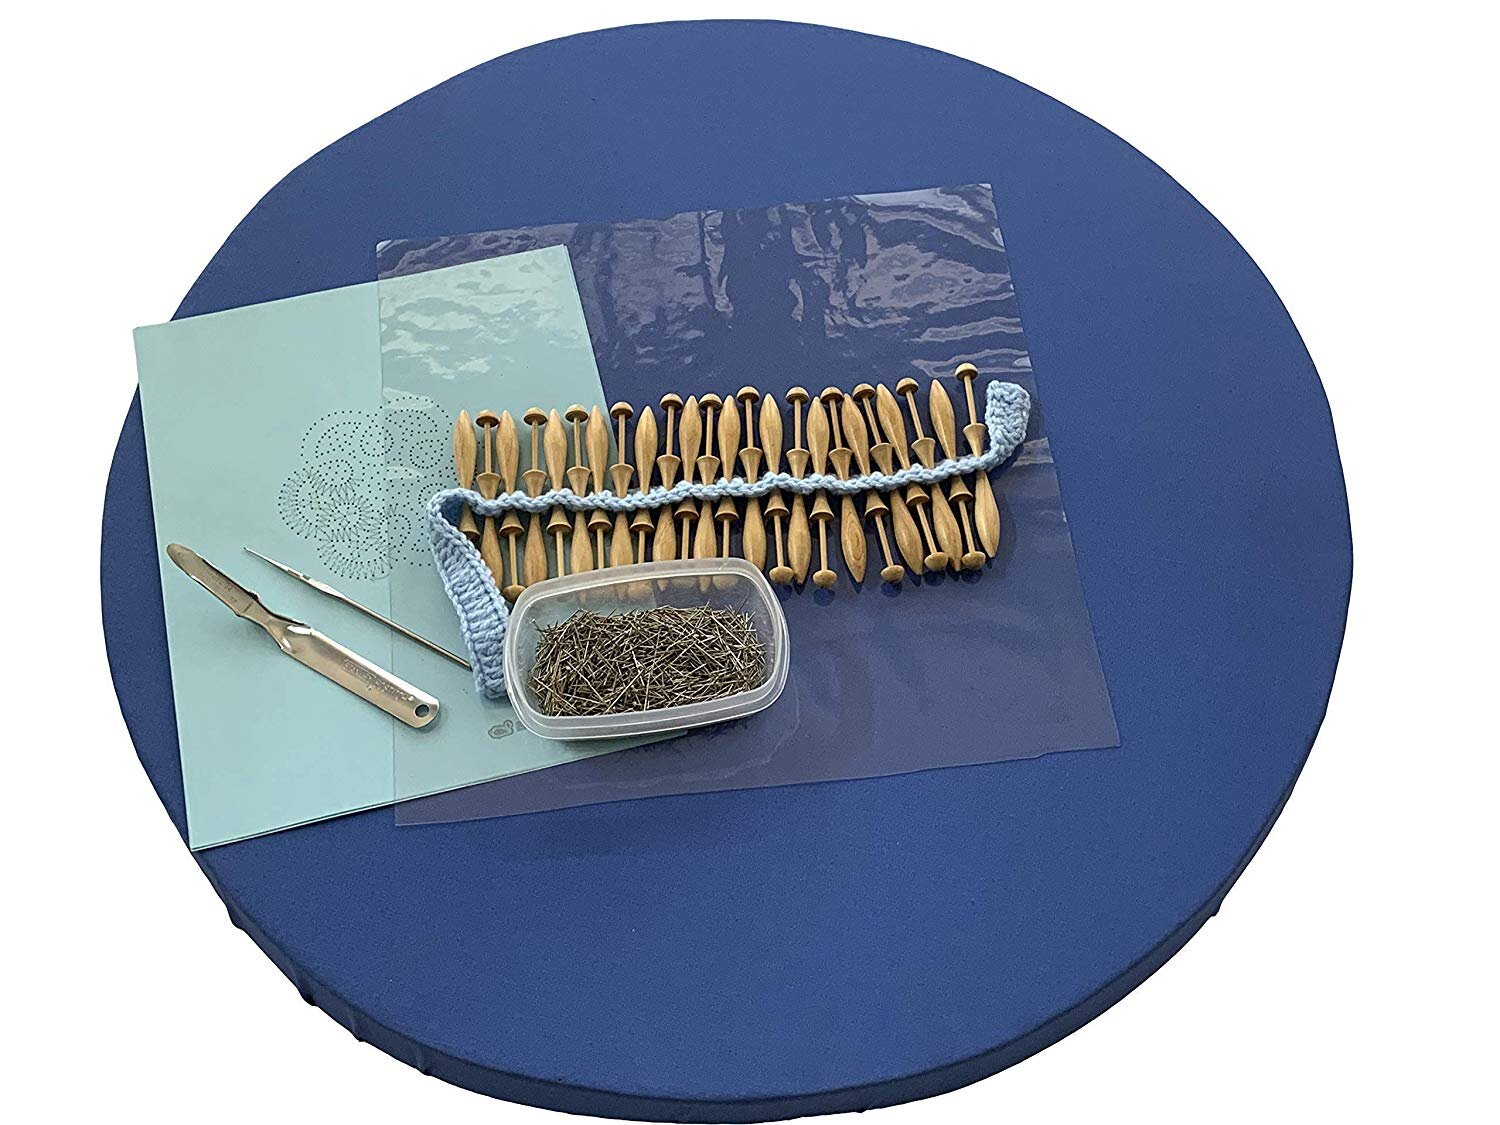 Bobbin Lace Kit For Beginners By Bobbin Lace Online 23" Flat Round Board 2" Thick  Lacemaking Kit Everything You Need To Get Started